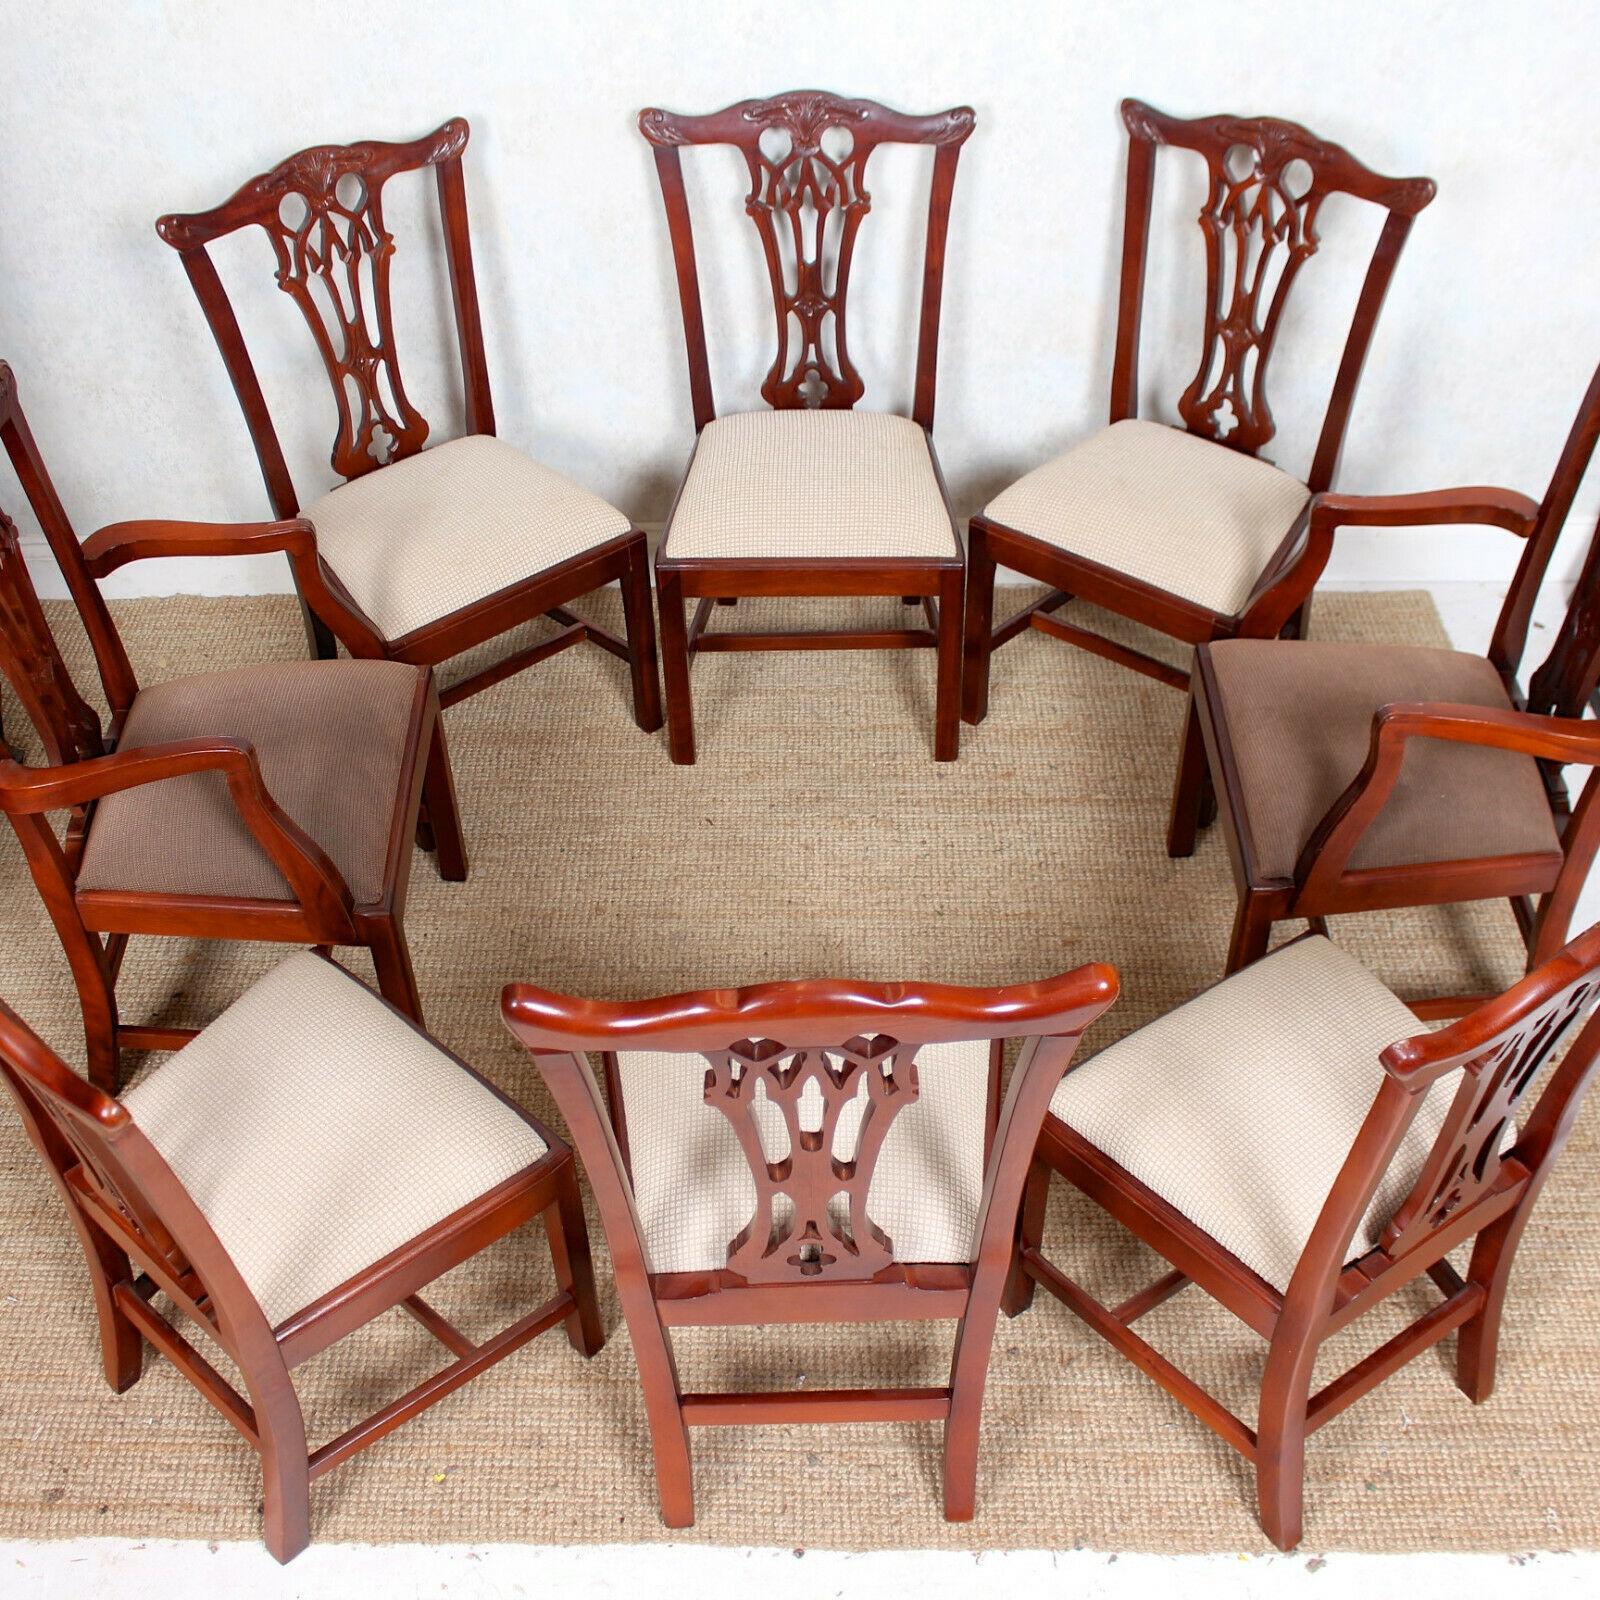 English Mahogany Dining Table and 8 Chairs Hepplewhite Stalker Antique Vintage For Sale 1